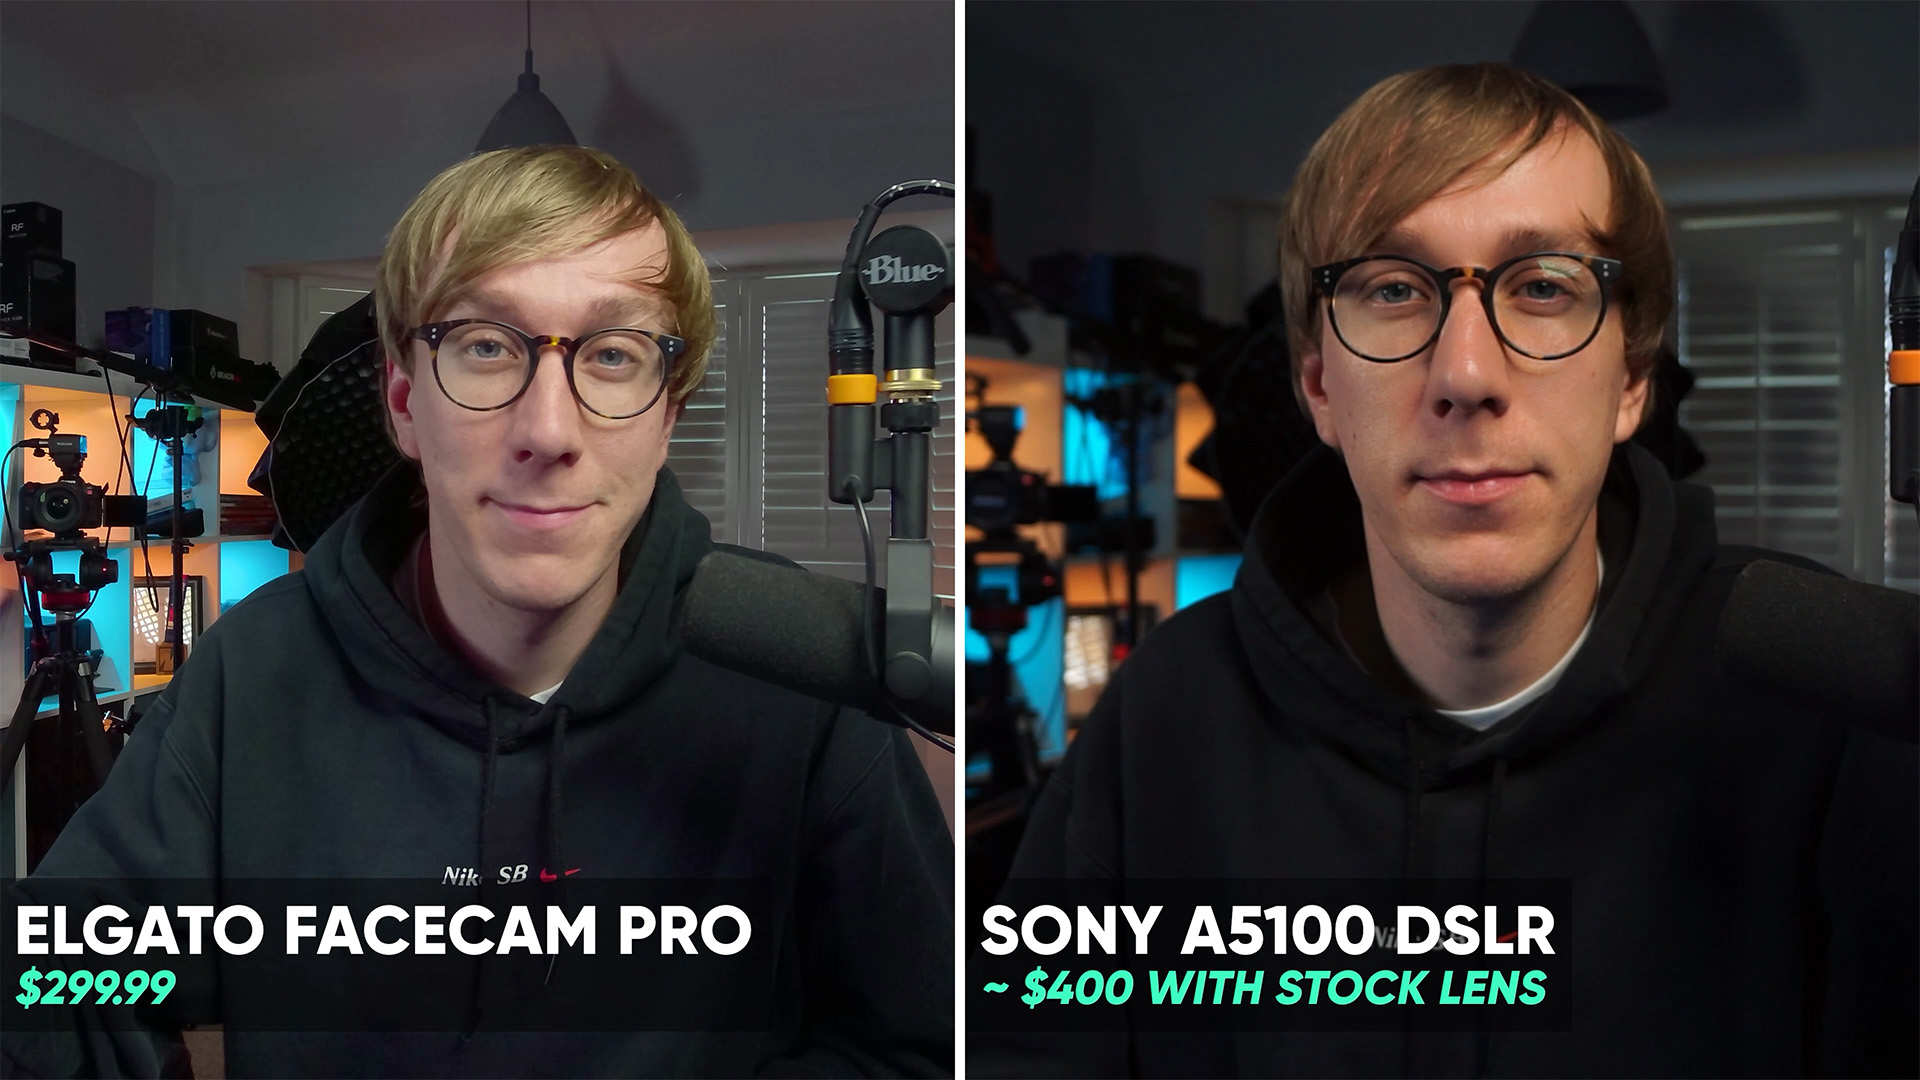 Facecam Pro vs a5100 with stock lens